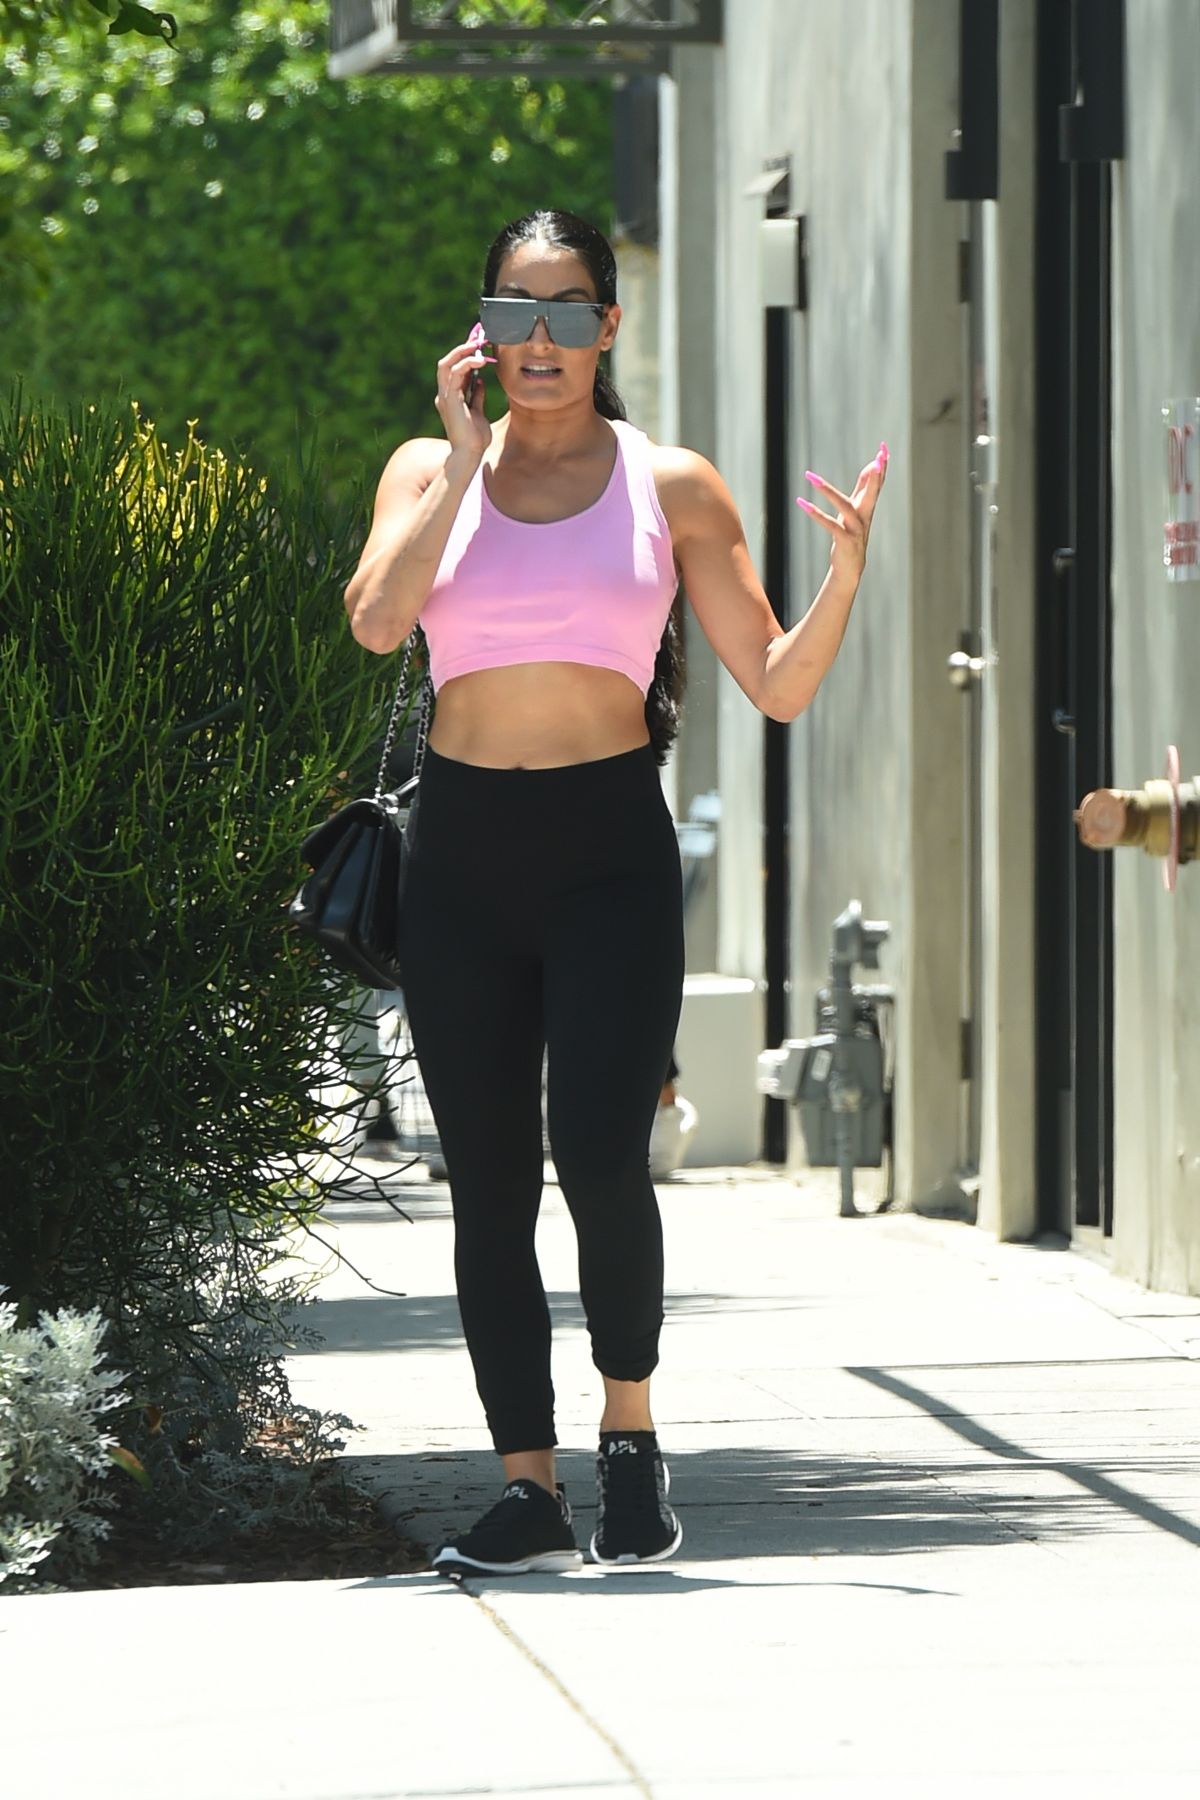 NIKKI BELLA Out and About in Los Feliz 05/06/2019 – HawtCelebs